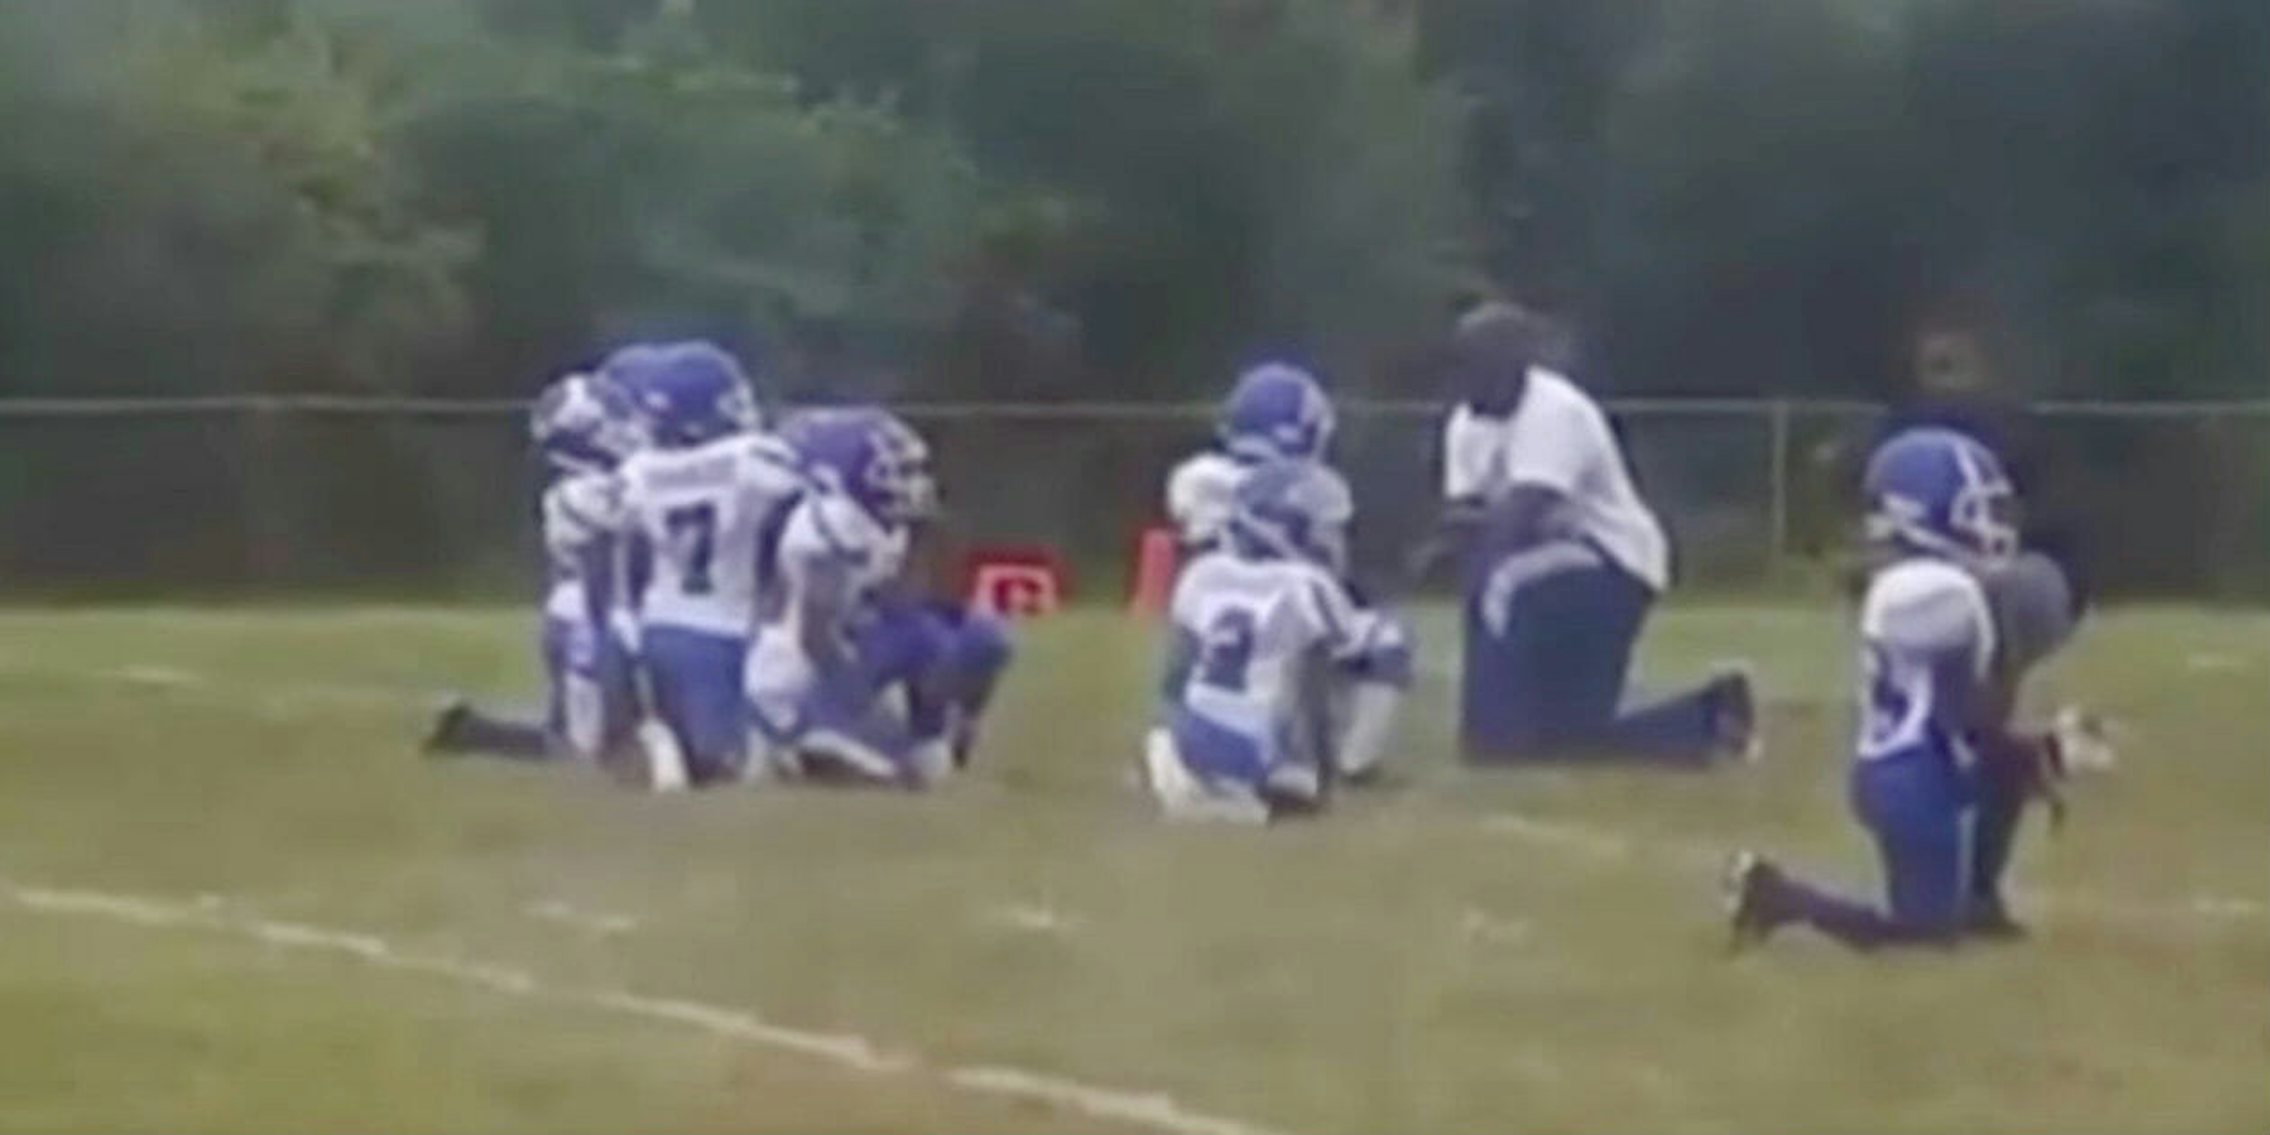 kneel for national anthem st. louis youth team